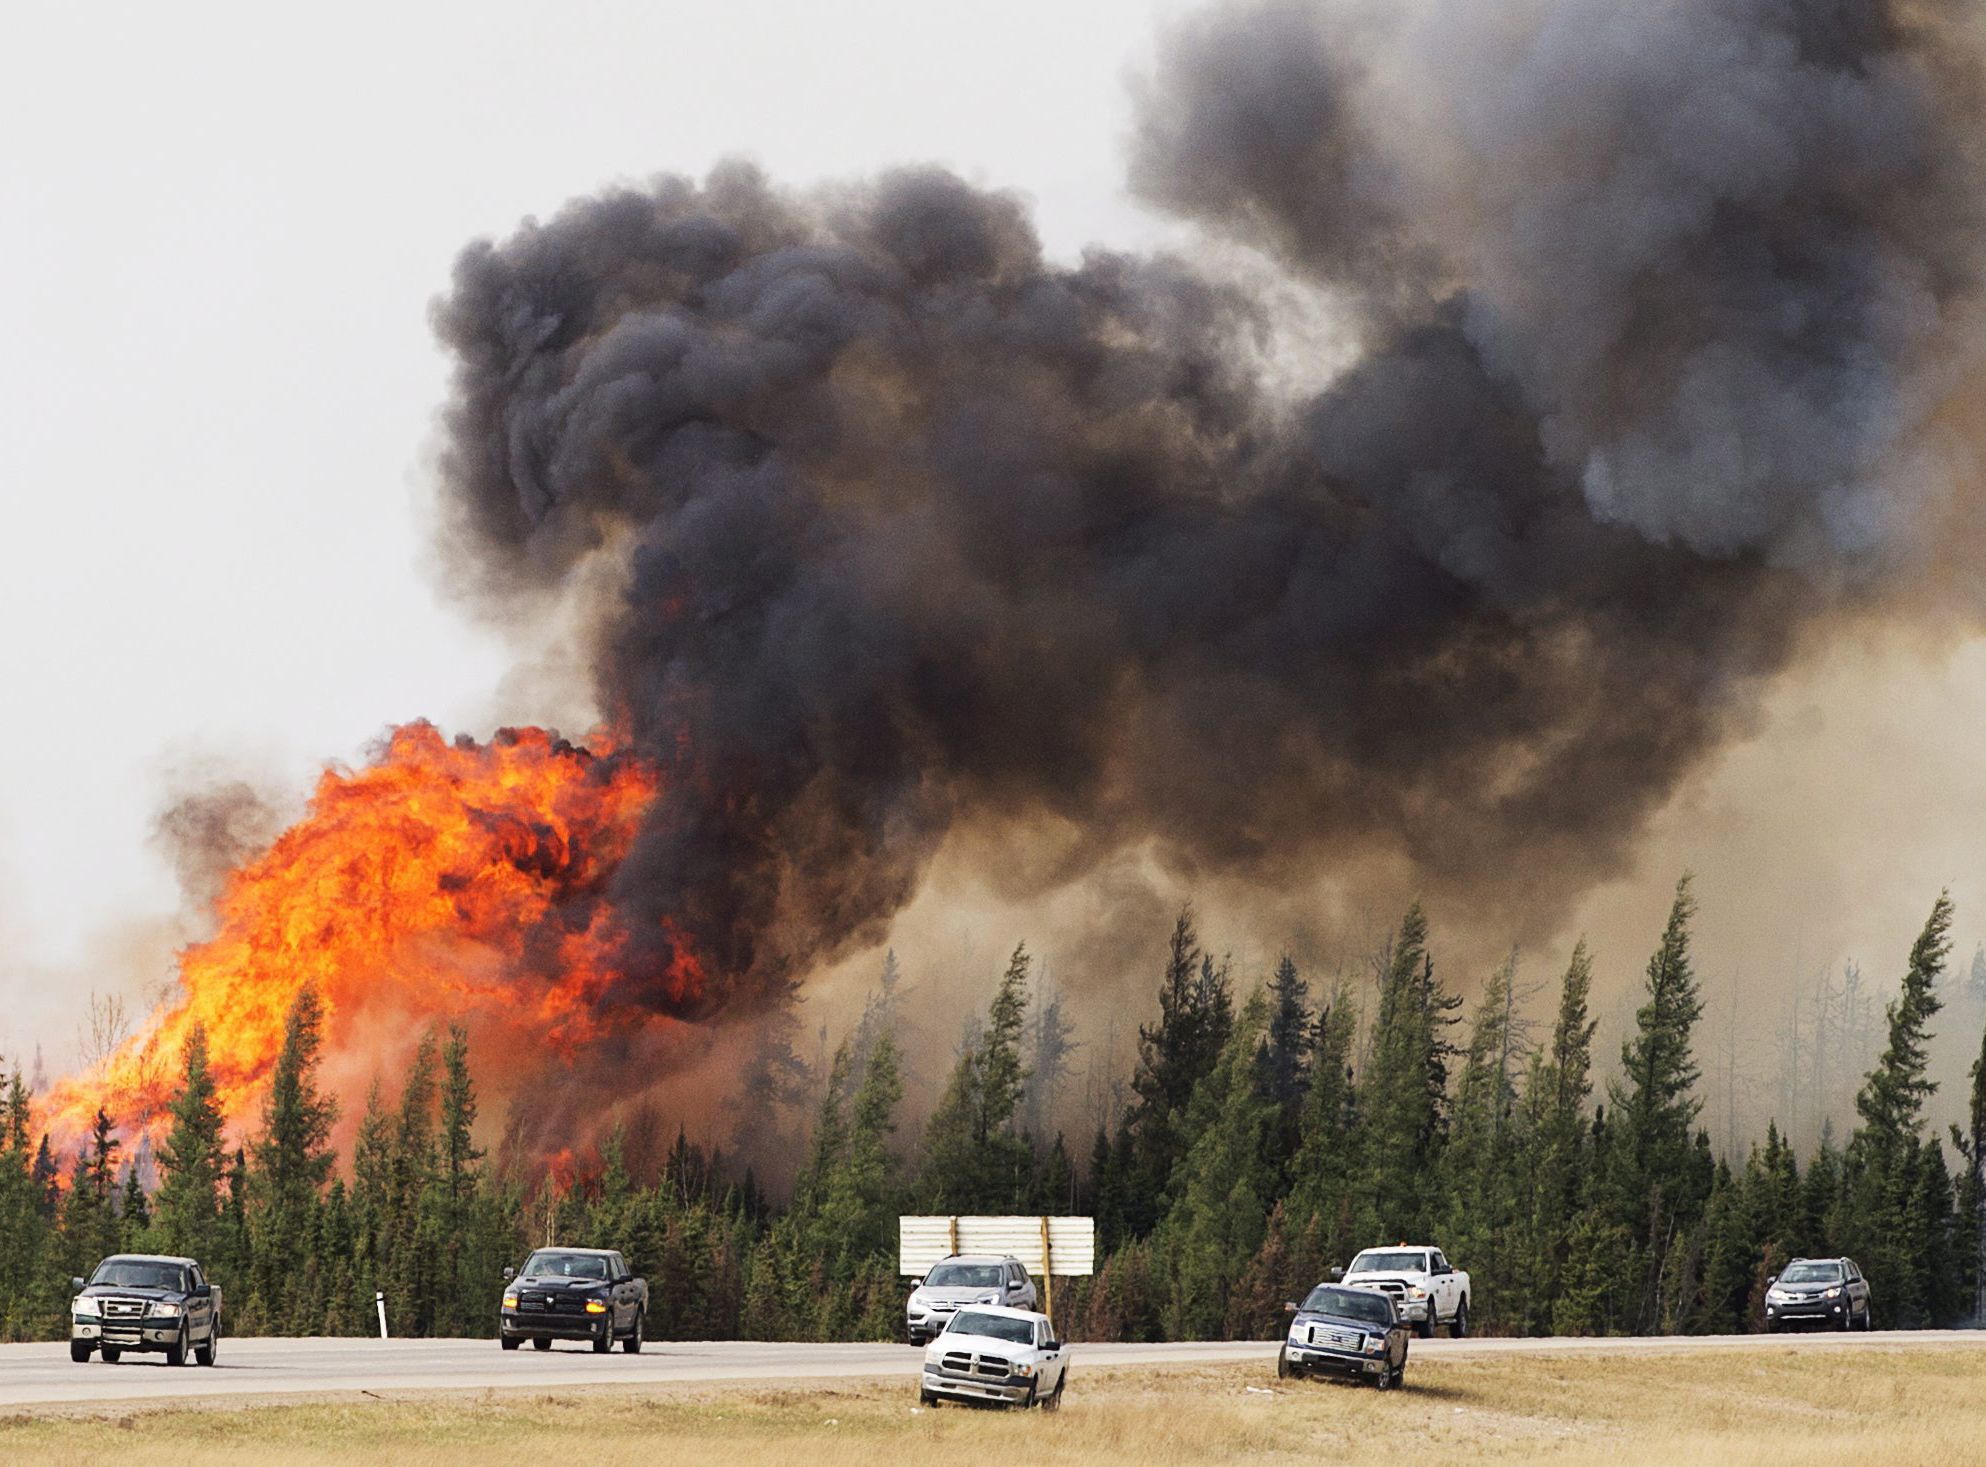 A wildfire burns south of Fort McMurray, Alberta, near Highway 63 on Saturday.